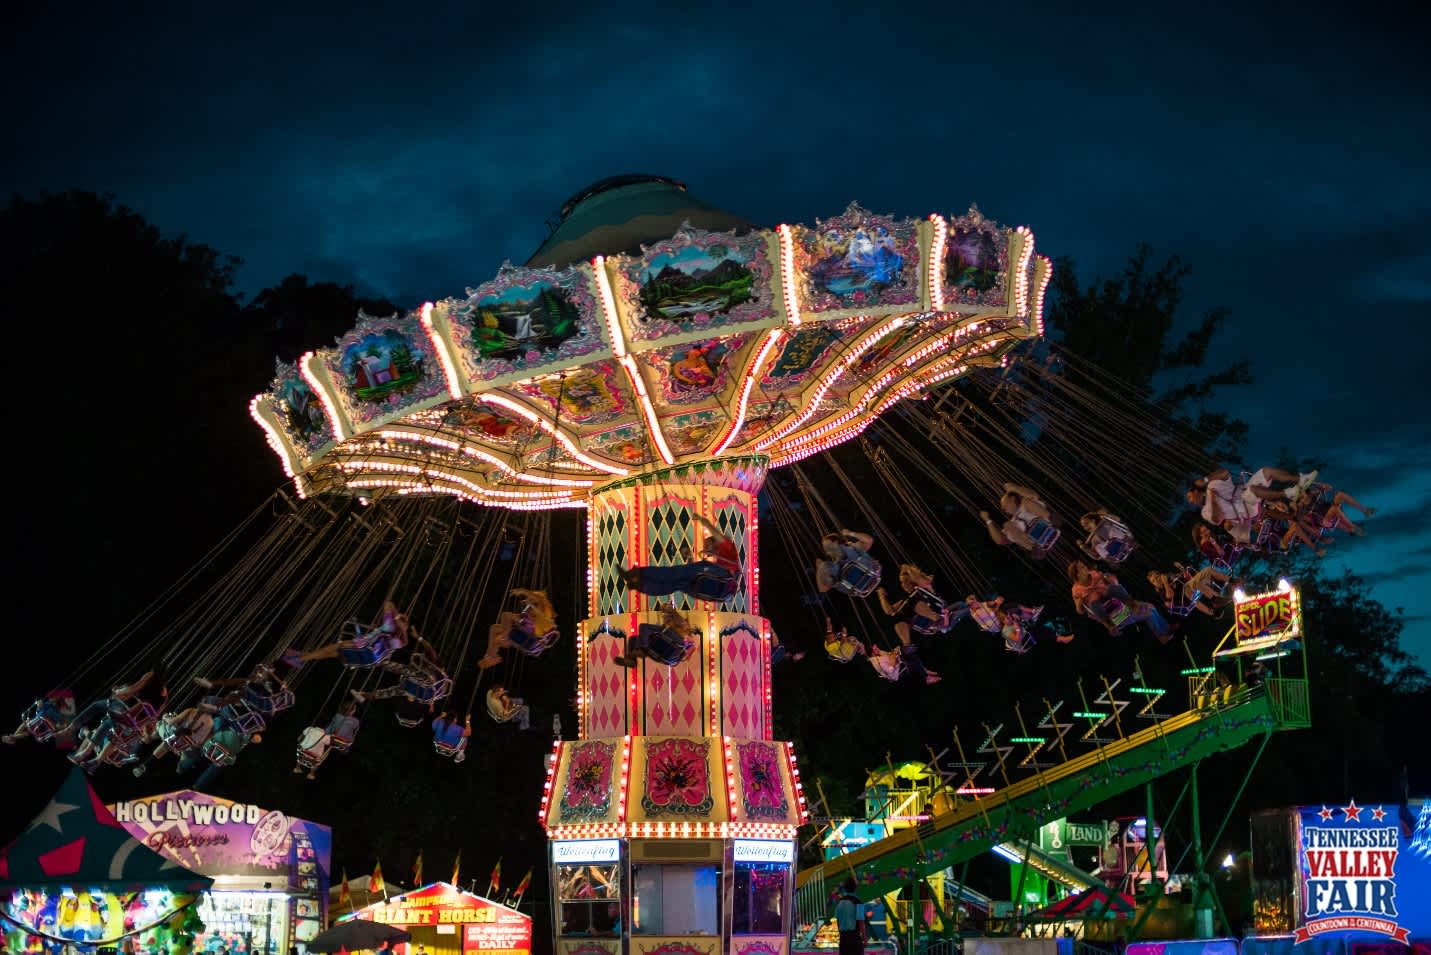 The Historic Tennessee Valley Fair